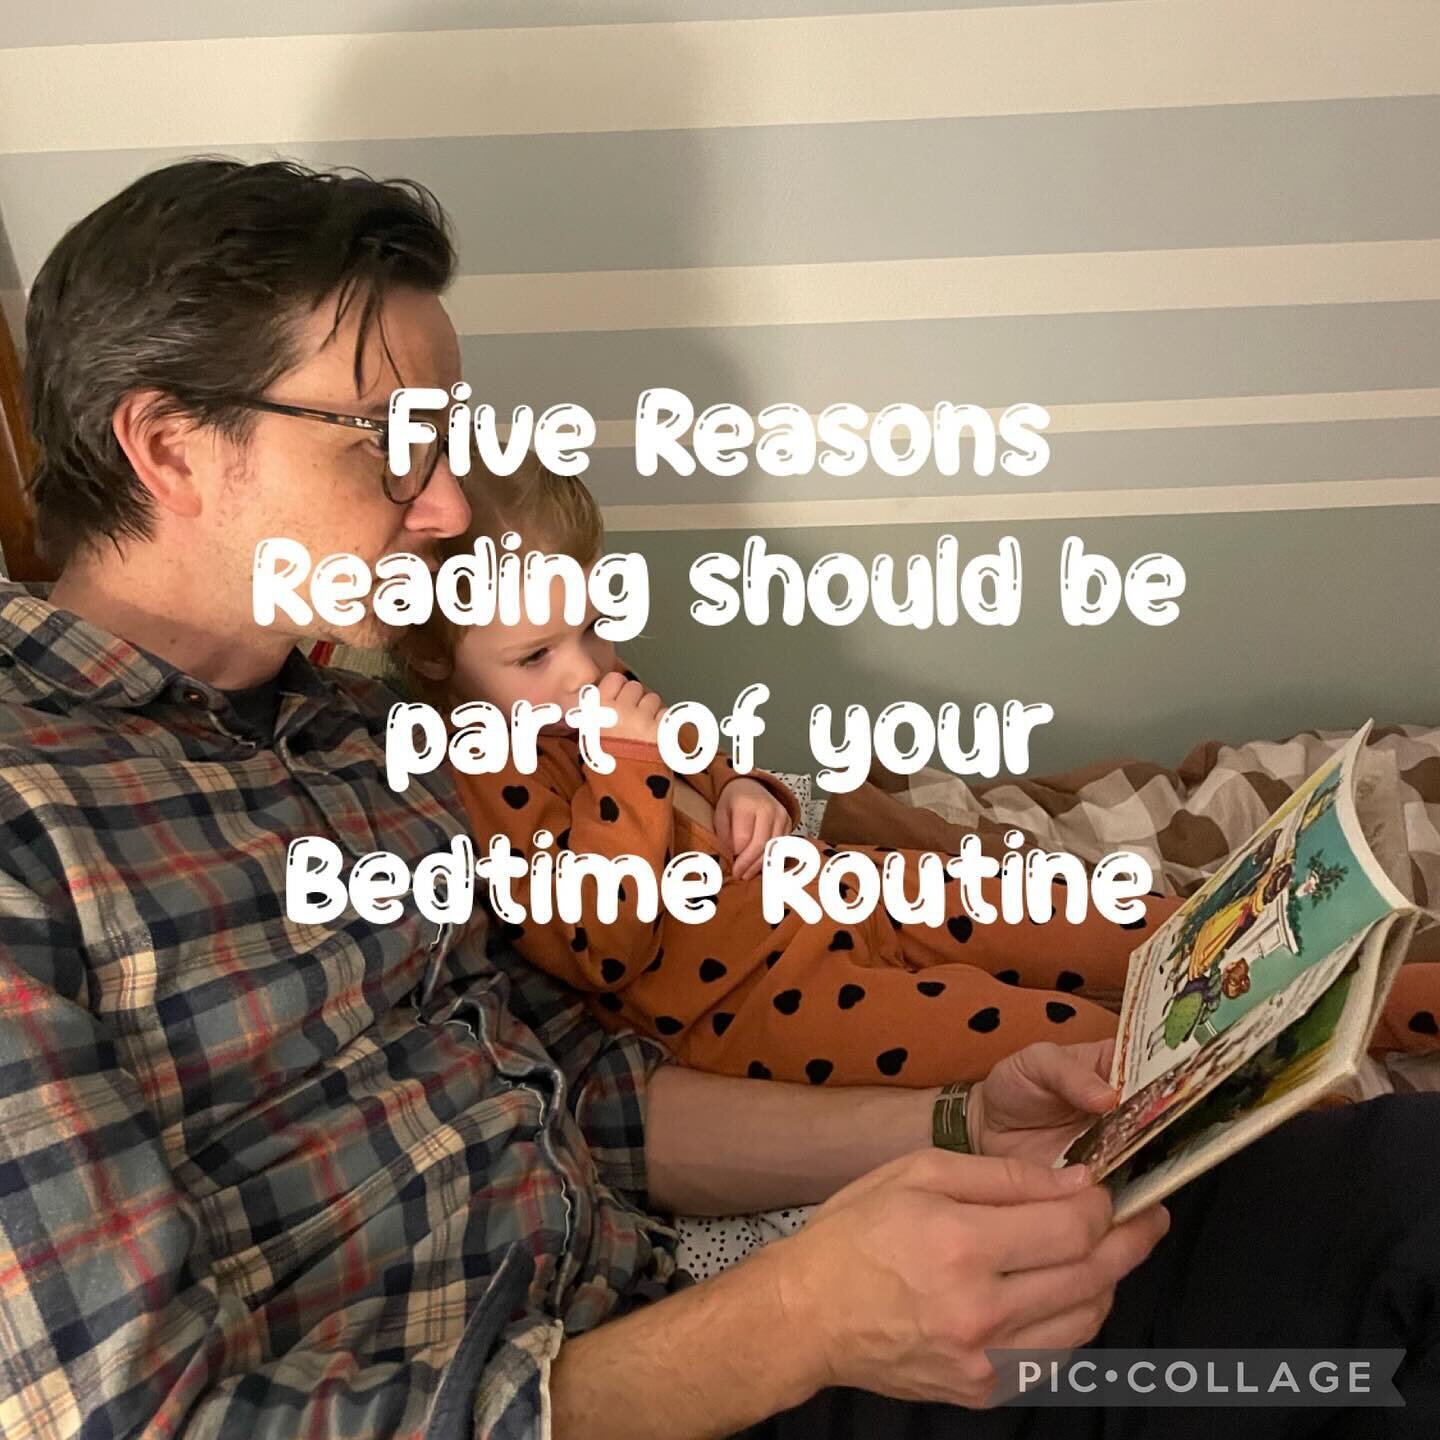 As a former school librarian I am passionate about the importance of reading! Building reading into the sleep routine has so many benefits! Here are just five top reasons:
1. It fosters connection. Reading a story to your child is such a gift. It pro